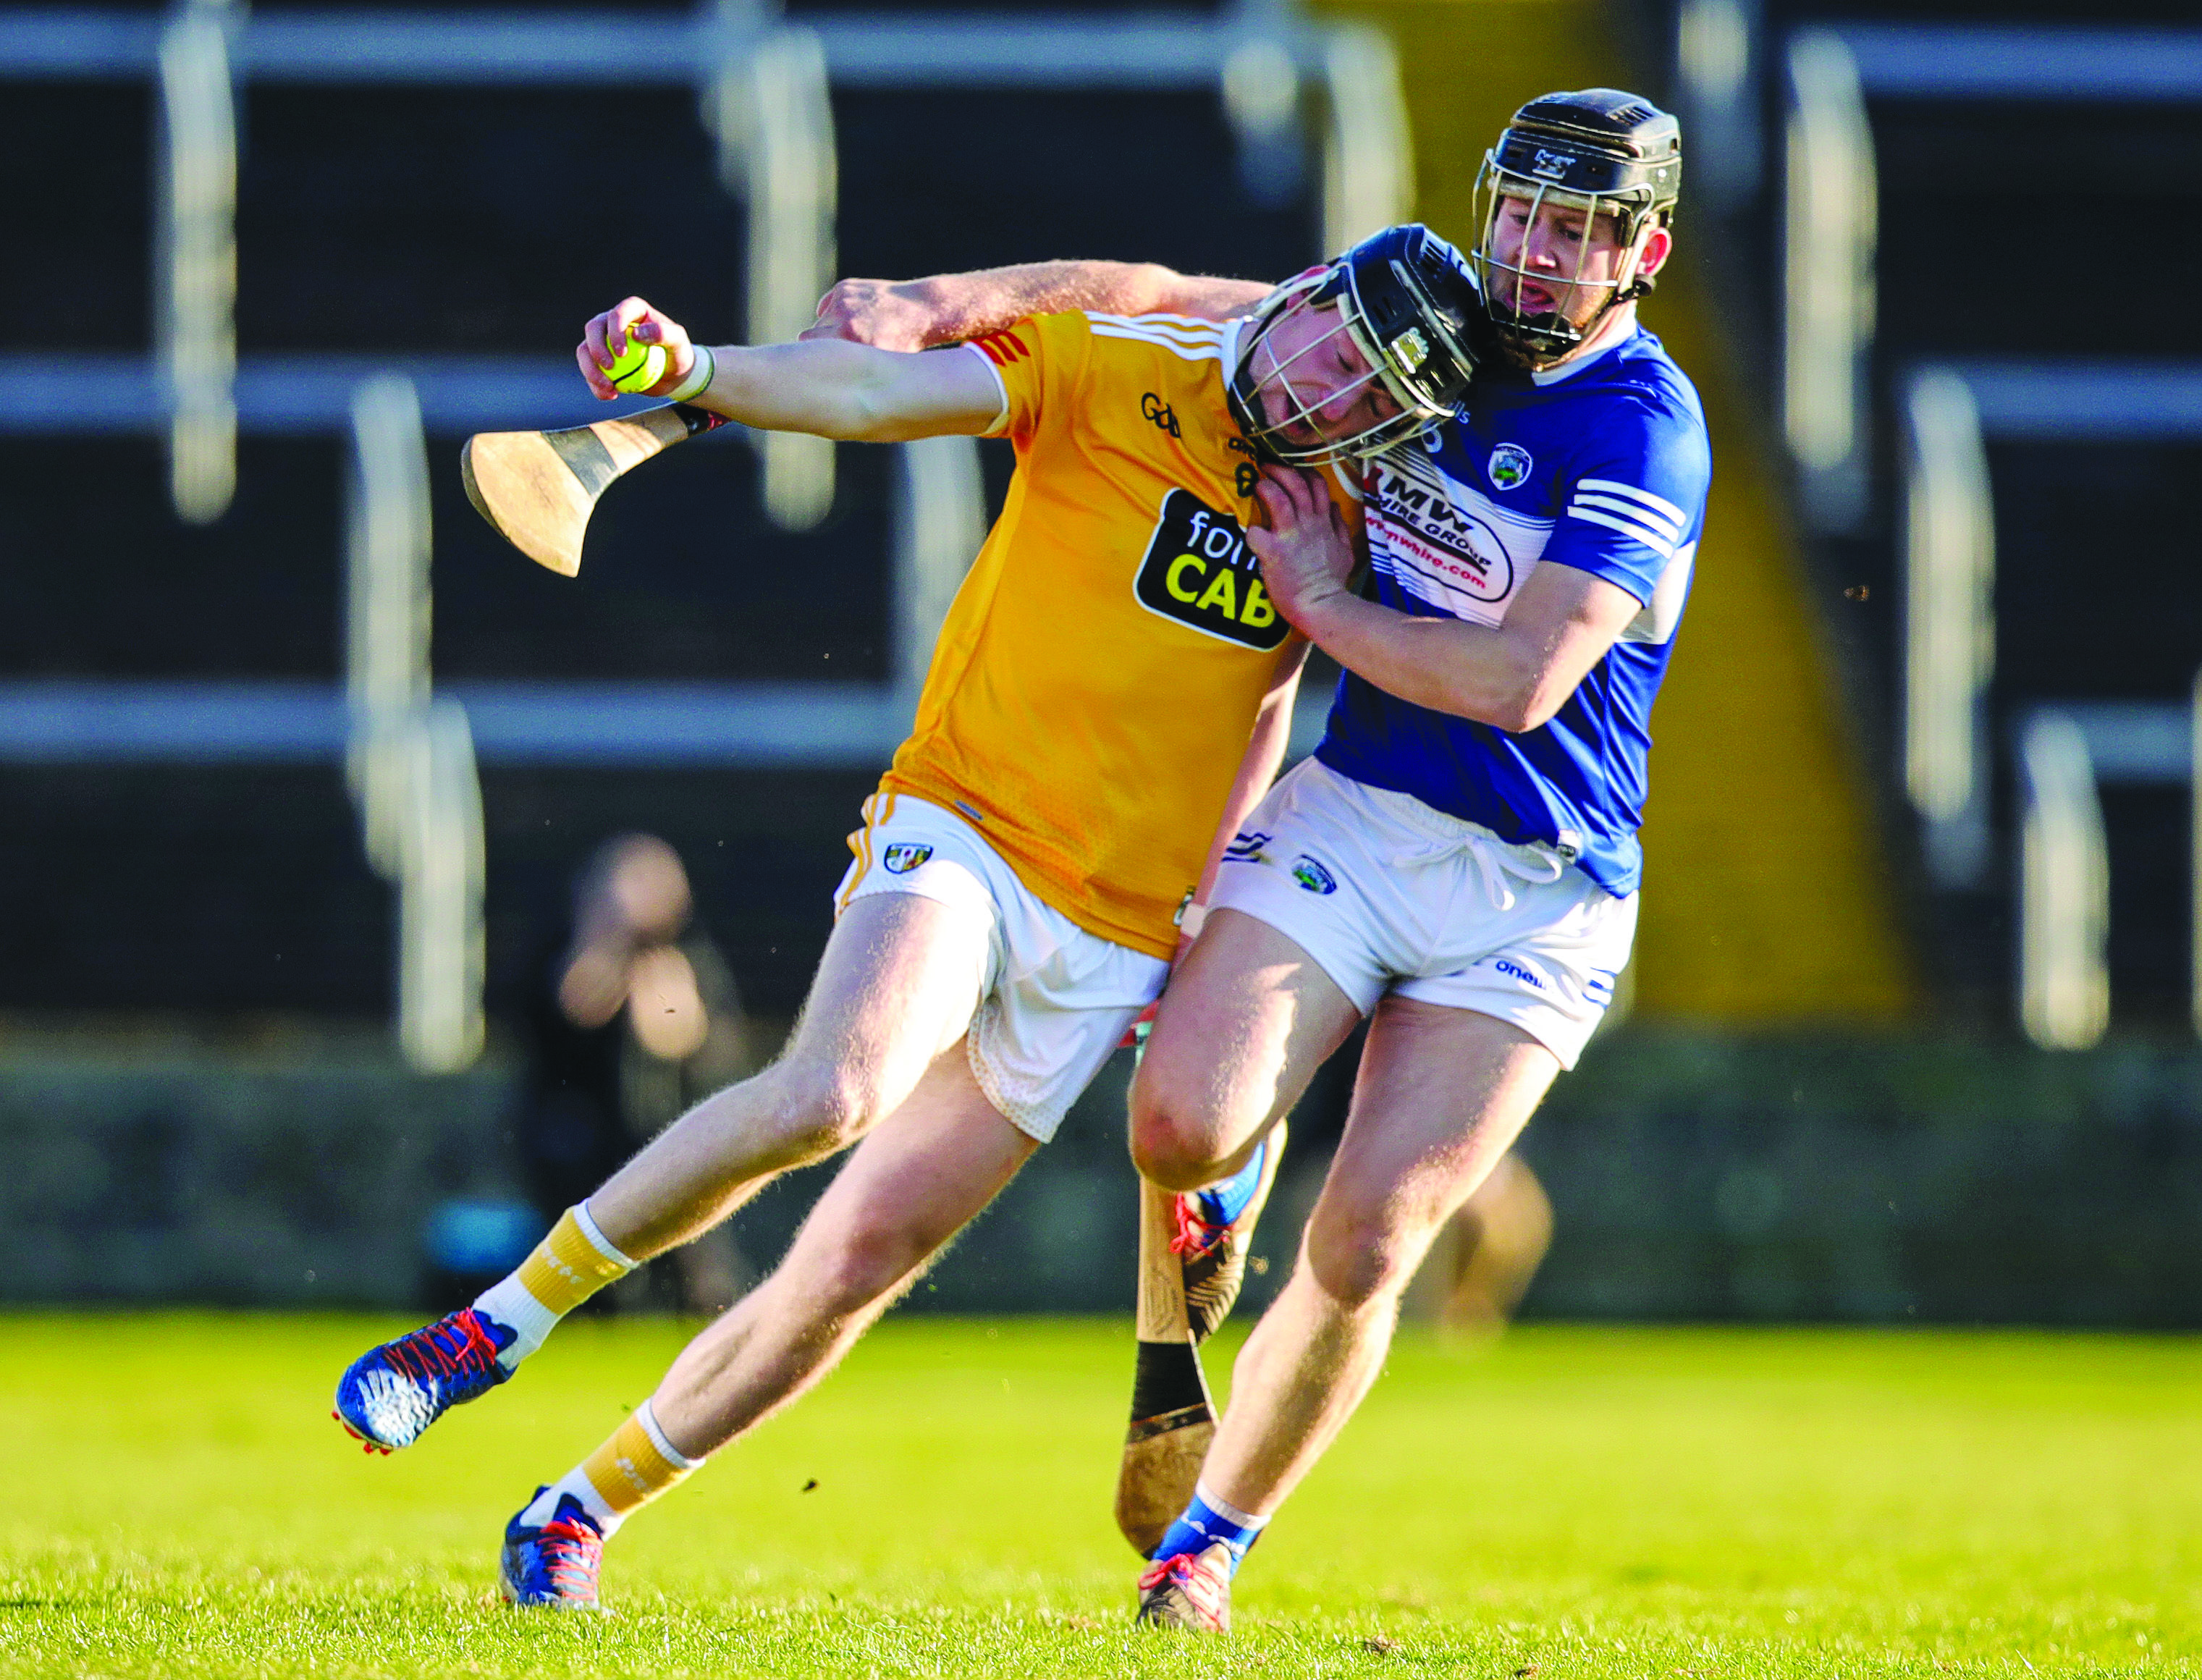 Keelan Molloy is bottled up by Liam O’Connell during last year’s meeting between the teams in O’Moore Park that was won by Laois, sending Antrim into a relegation payoff - a situation the Saffrons want to avoid this Sunday with the winner safe 